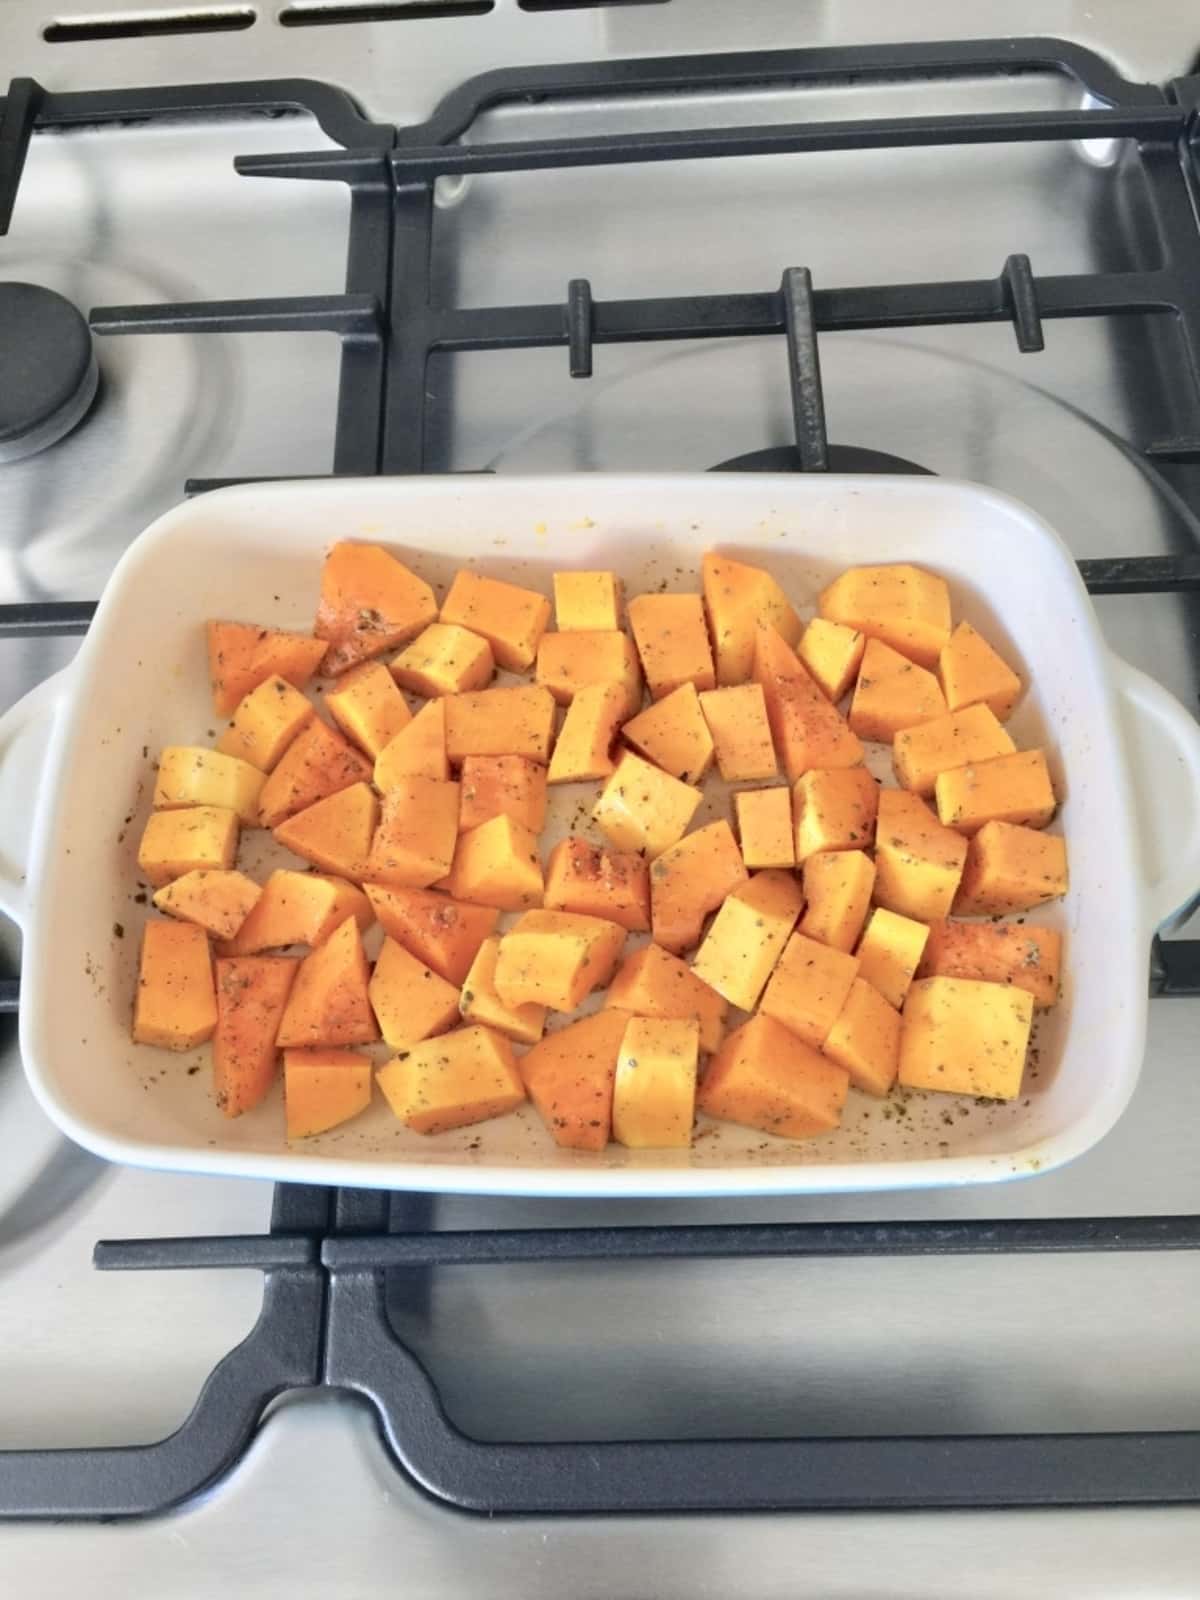 Chunks of butternut squash in a dish ready for roasting.